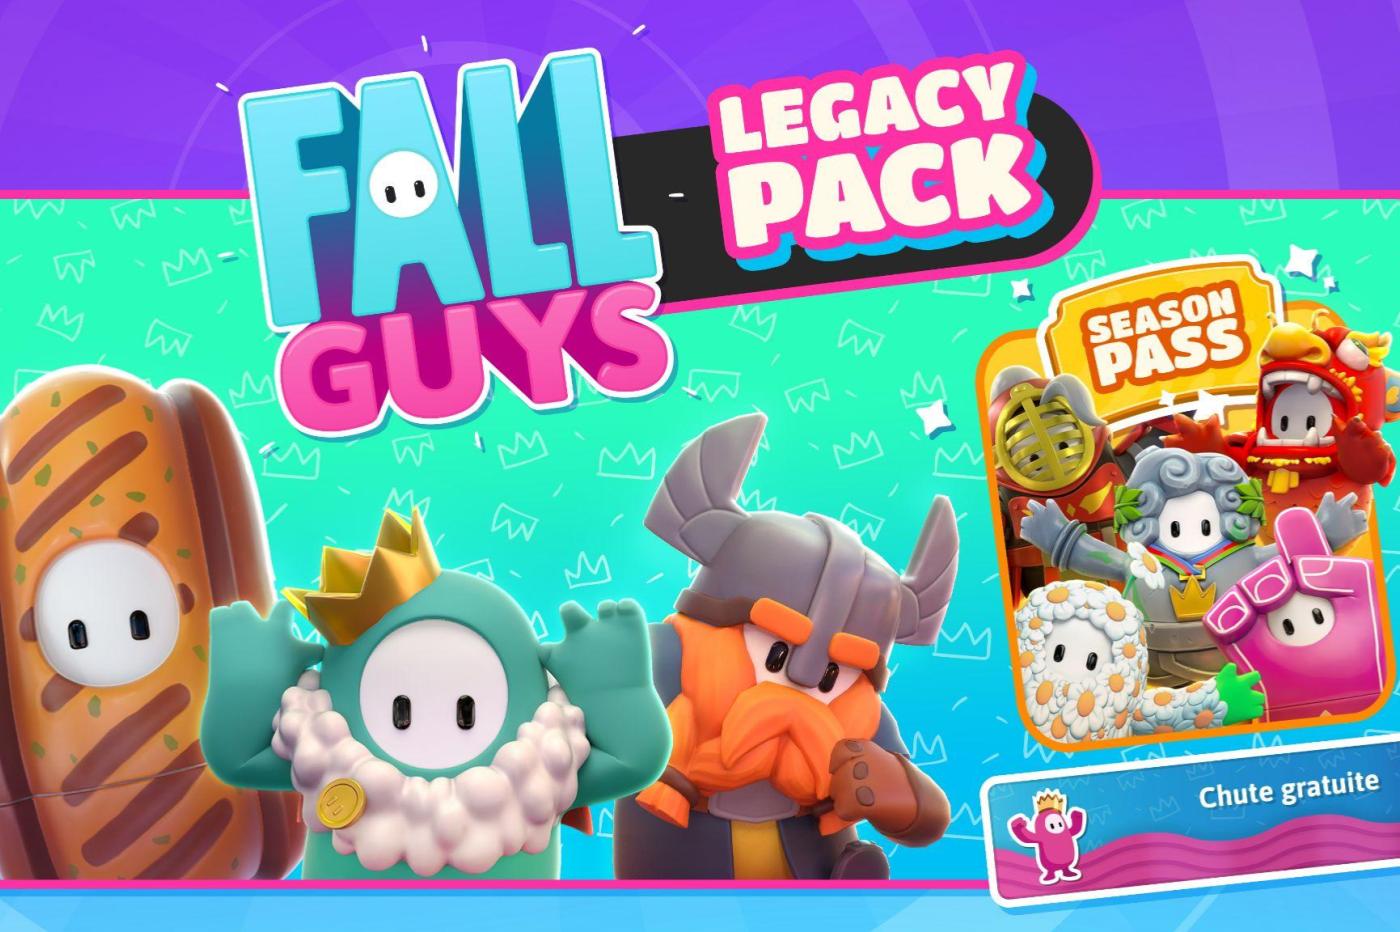 The promotional image of the Fall Guys Legacy Pack was presented to the owners of the original game.